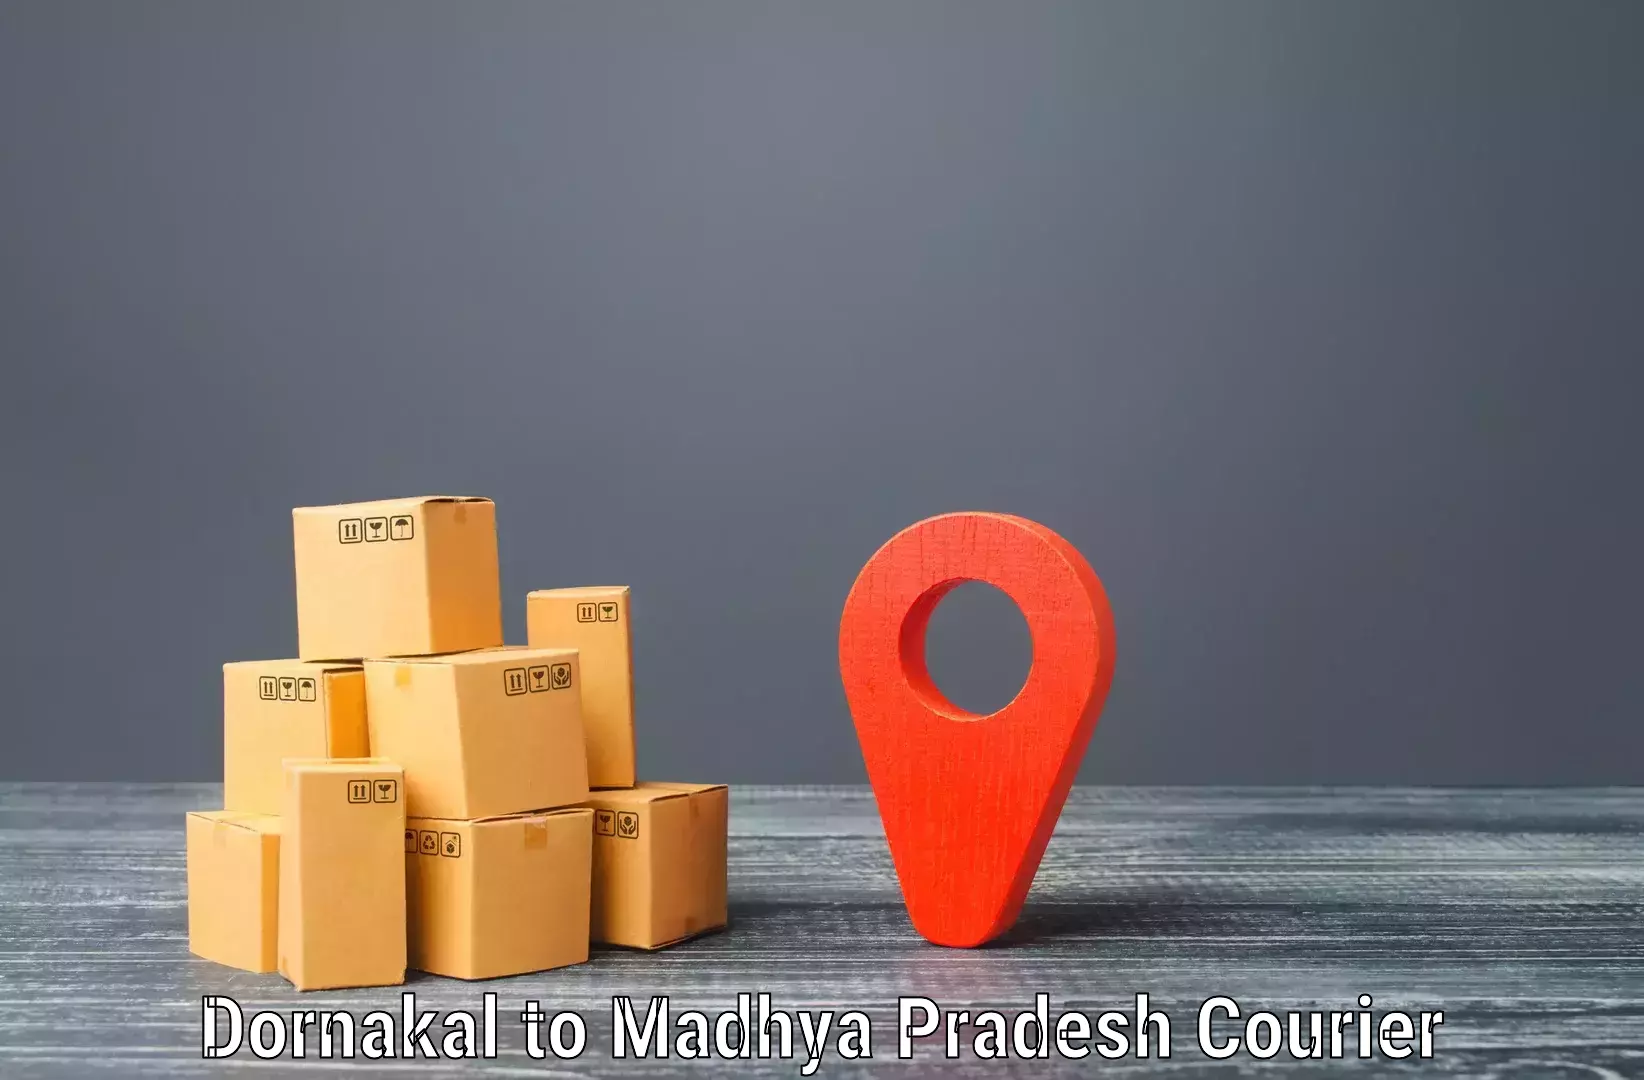 Quality courier partnerships Dornakal to BHEL Bhopal